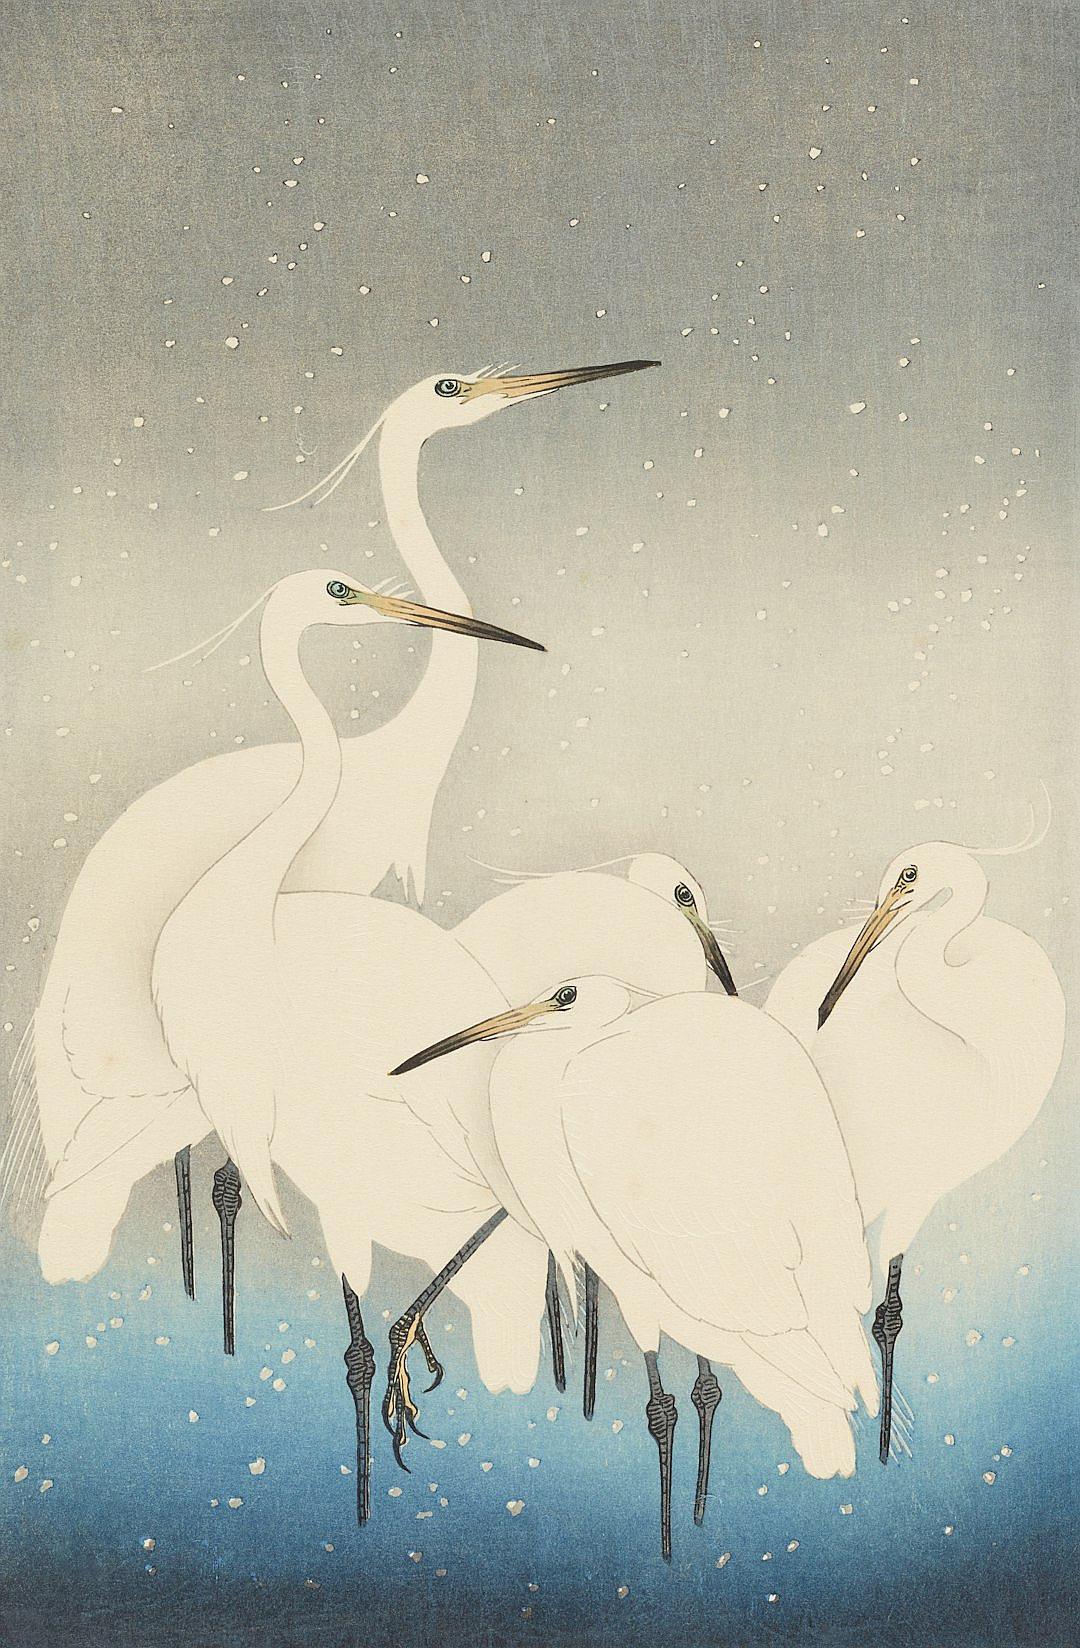 A group of white herons stand in the snow, their heads tilted up towards the sky. The background is a gradient from light blue to gray with small dots that resemble falling snowflakes, giving it an ethereal and serene feel, in the style of [Katsushika Hokusai](https://goo.gl/search?artist%20Katsushika%20Hokusai).